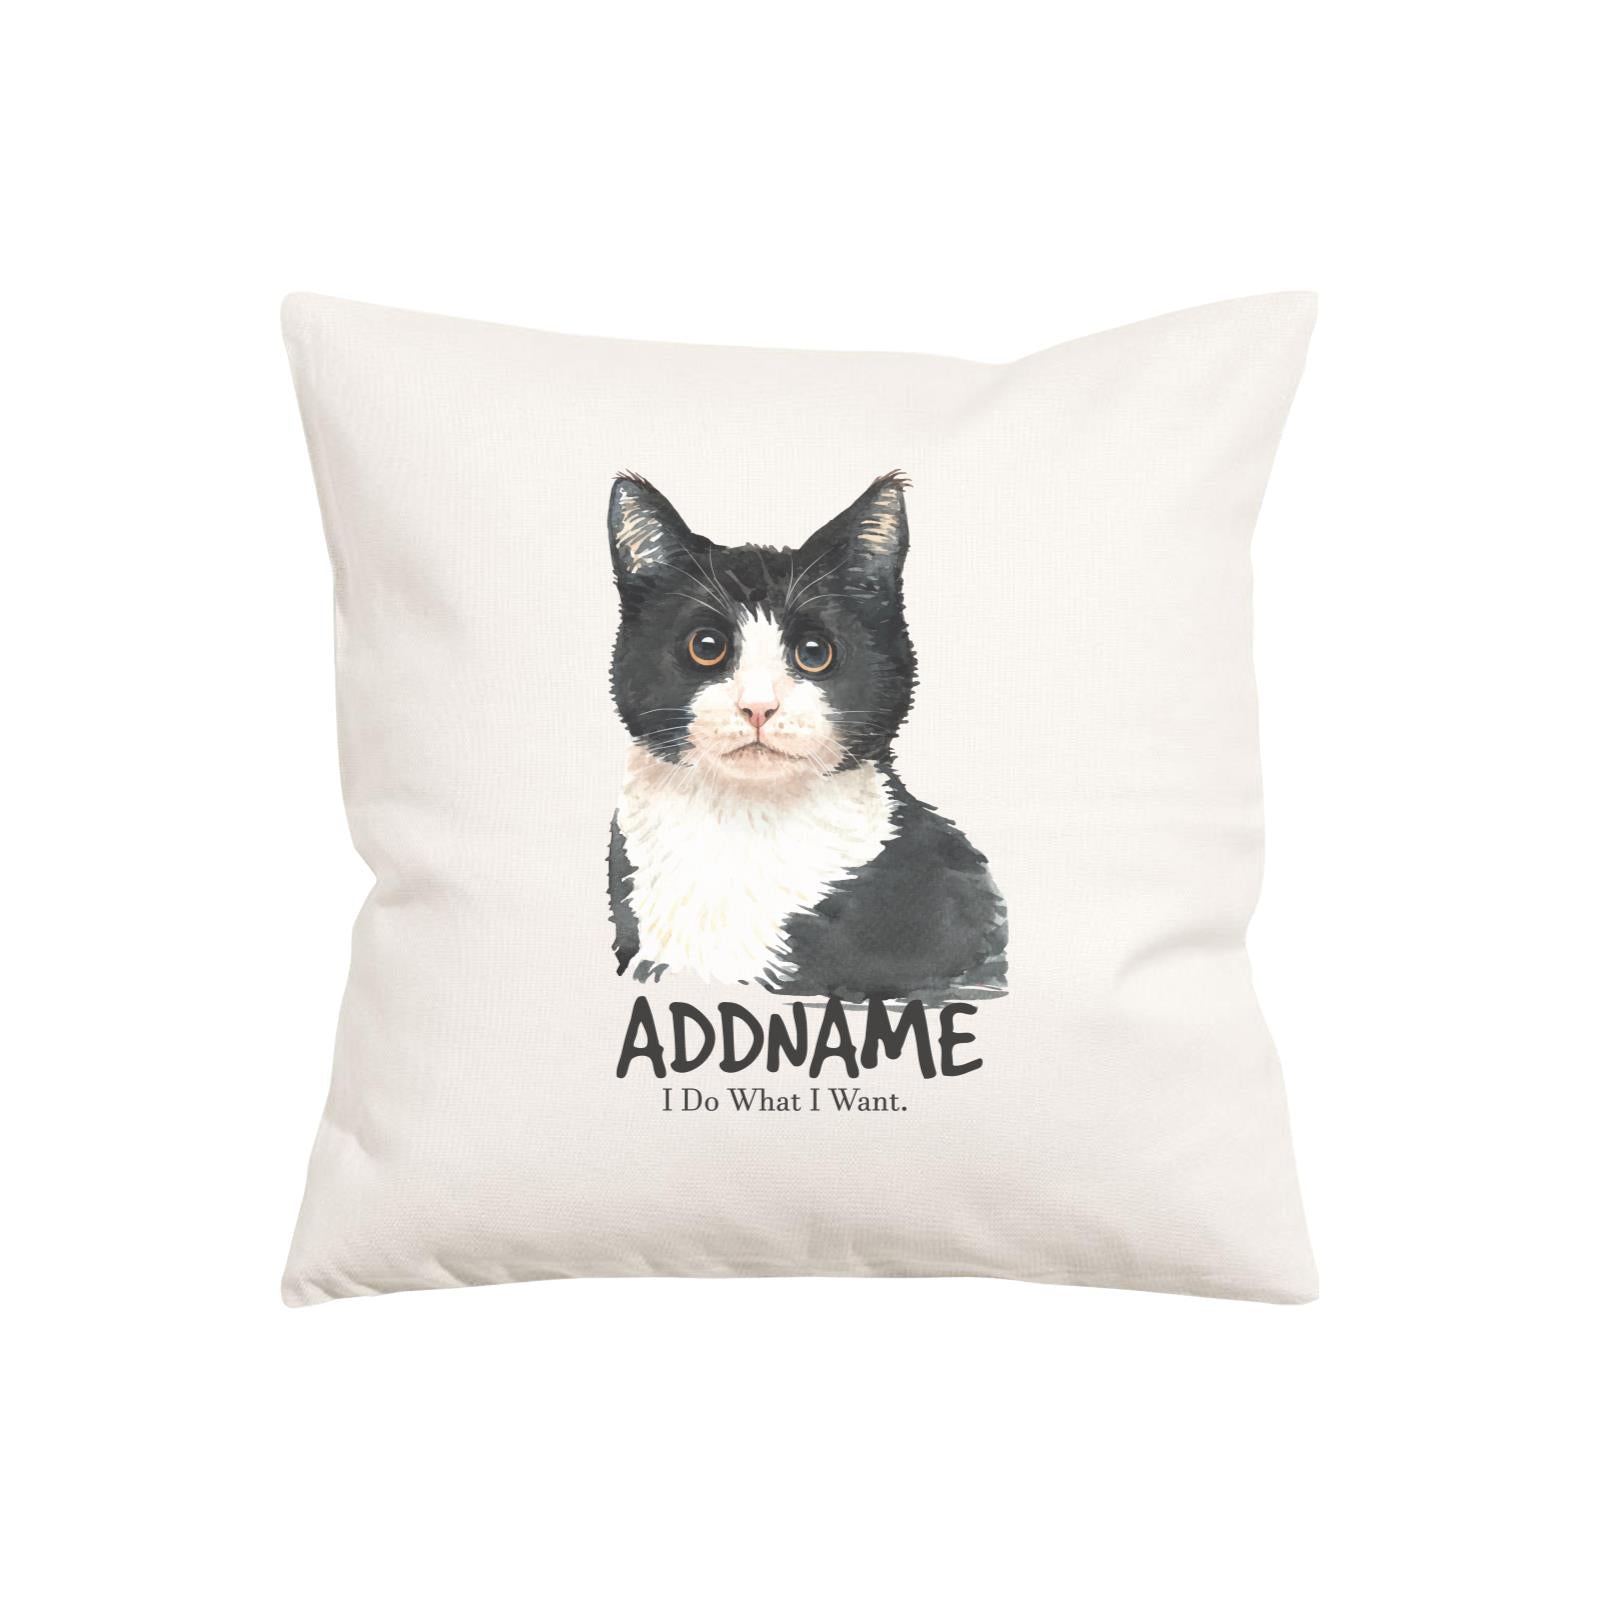 Watercolor Cat Series Black & White I Do What I Want Addname Pillow Cushion